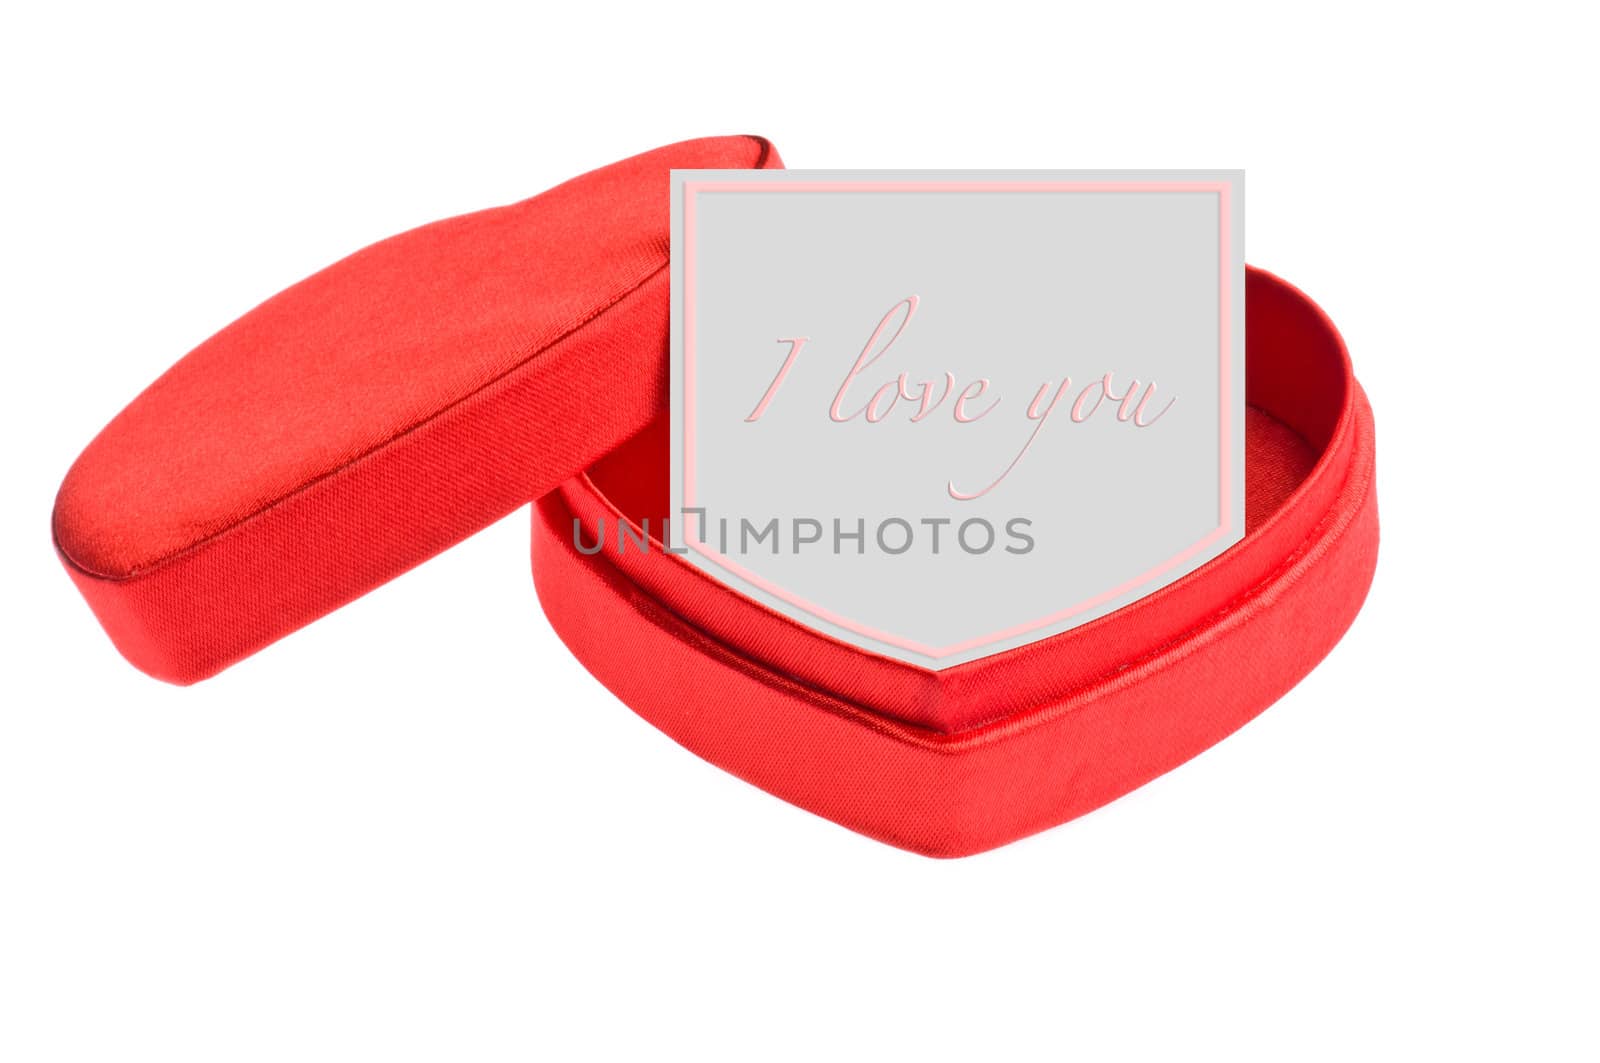 Red heart shape box with card "I love you"
